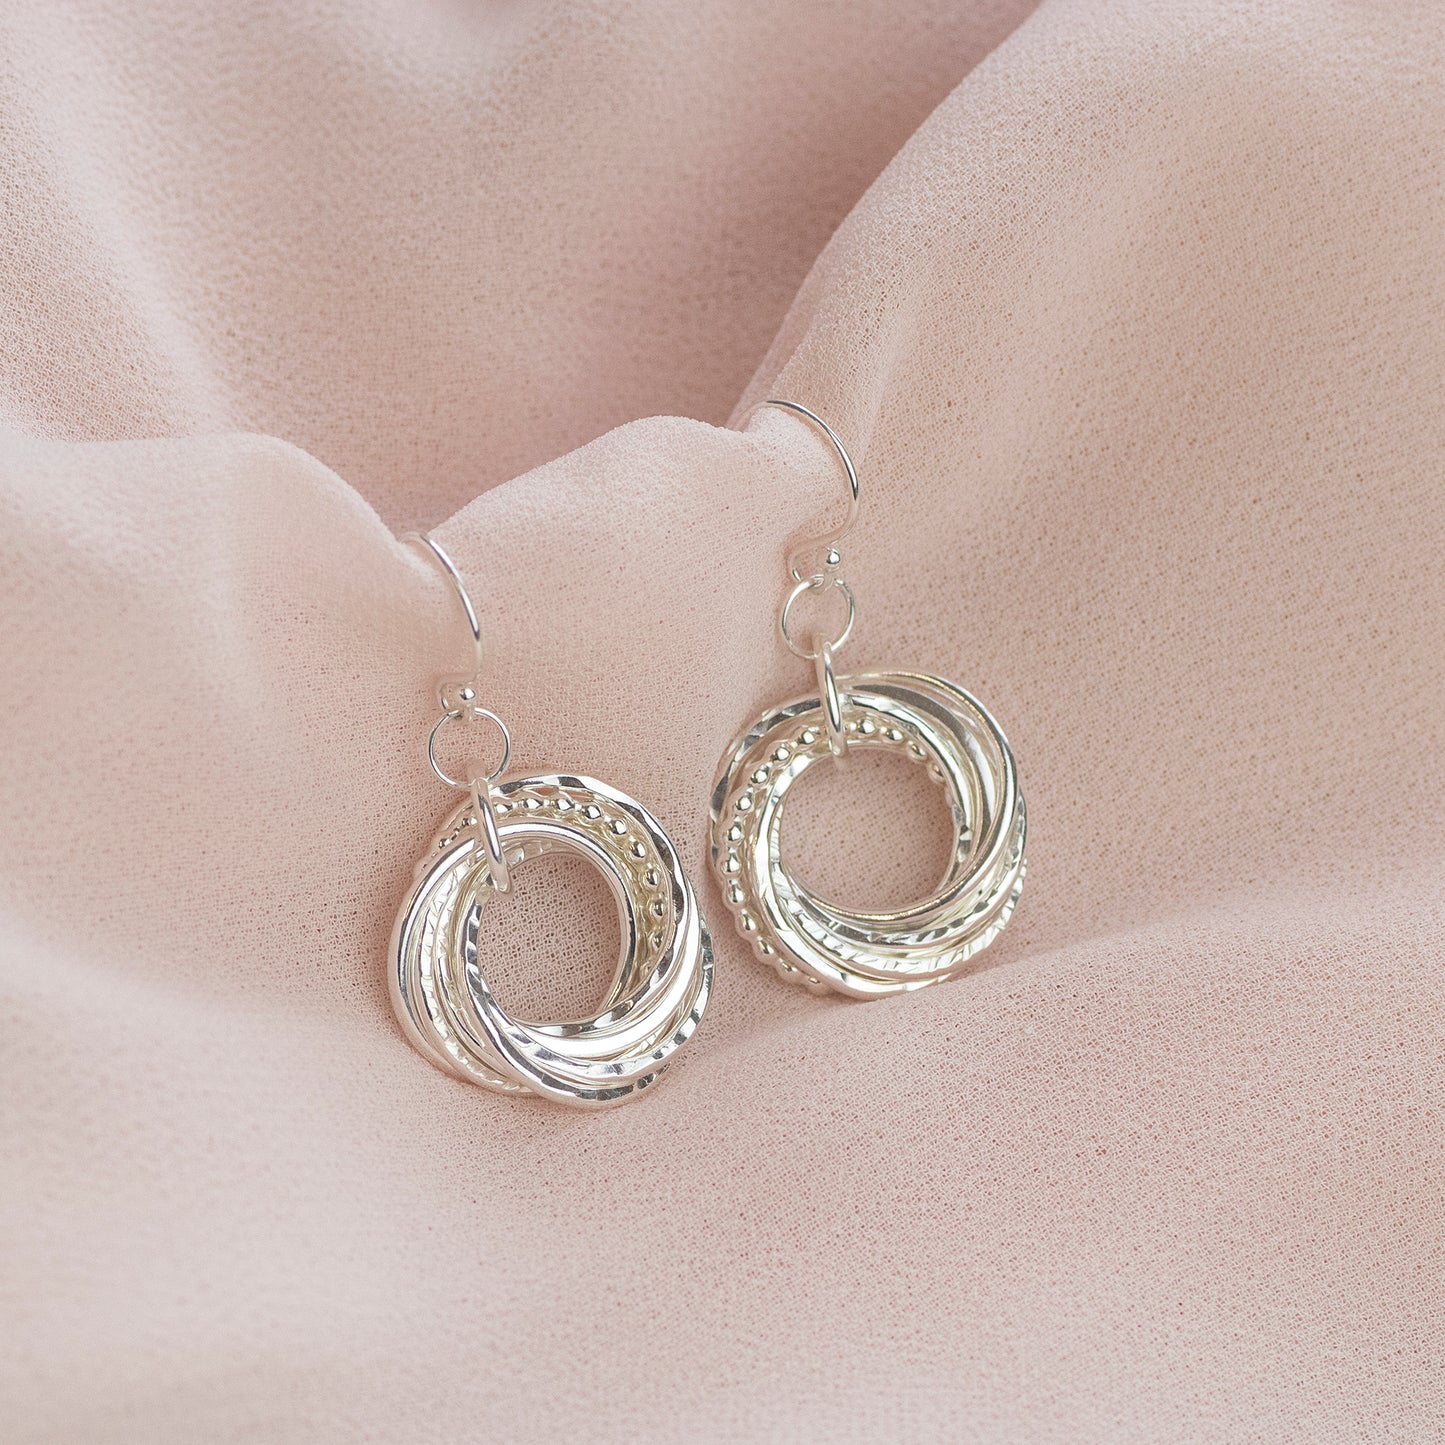 80th Birthday Earrings - The Original 8 Links for 8 Decades Earrings - Petite Silver